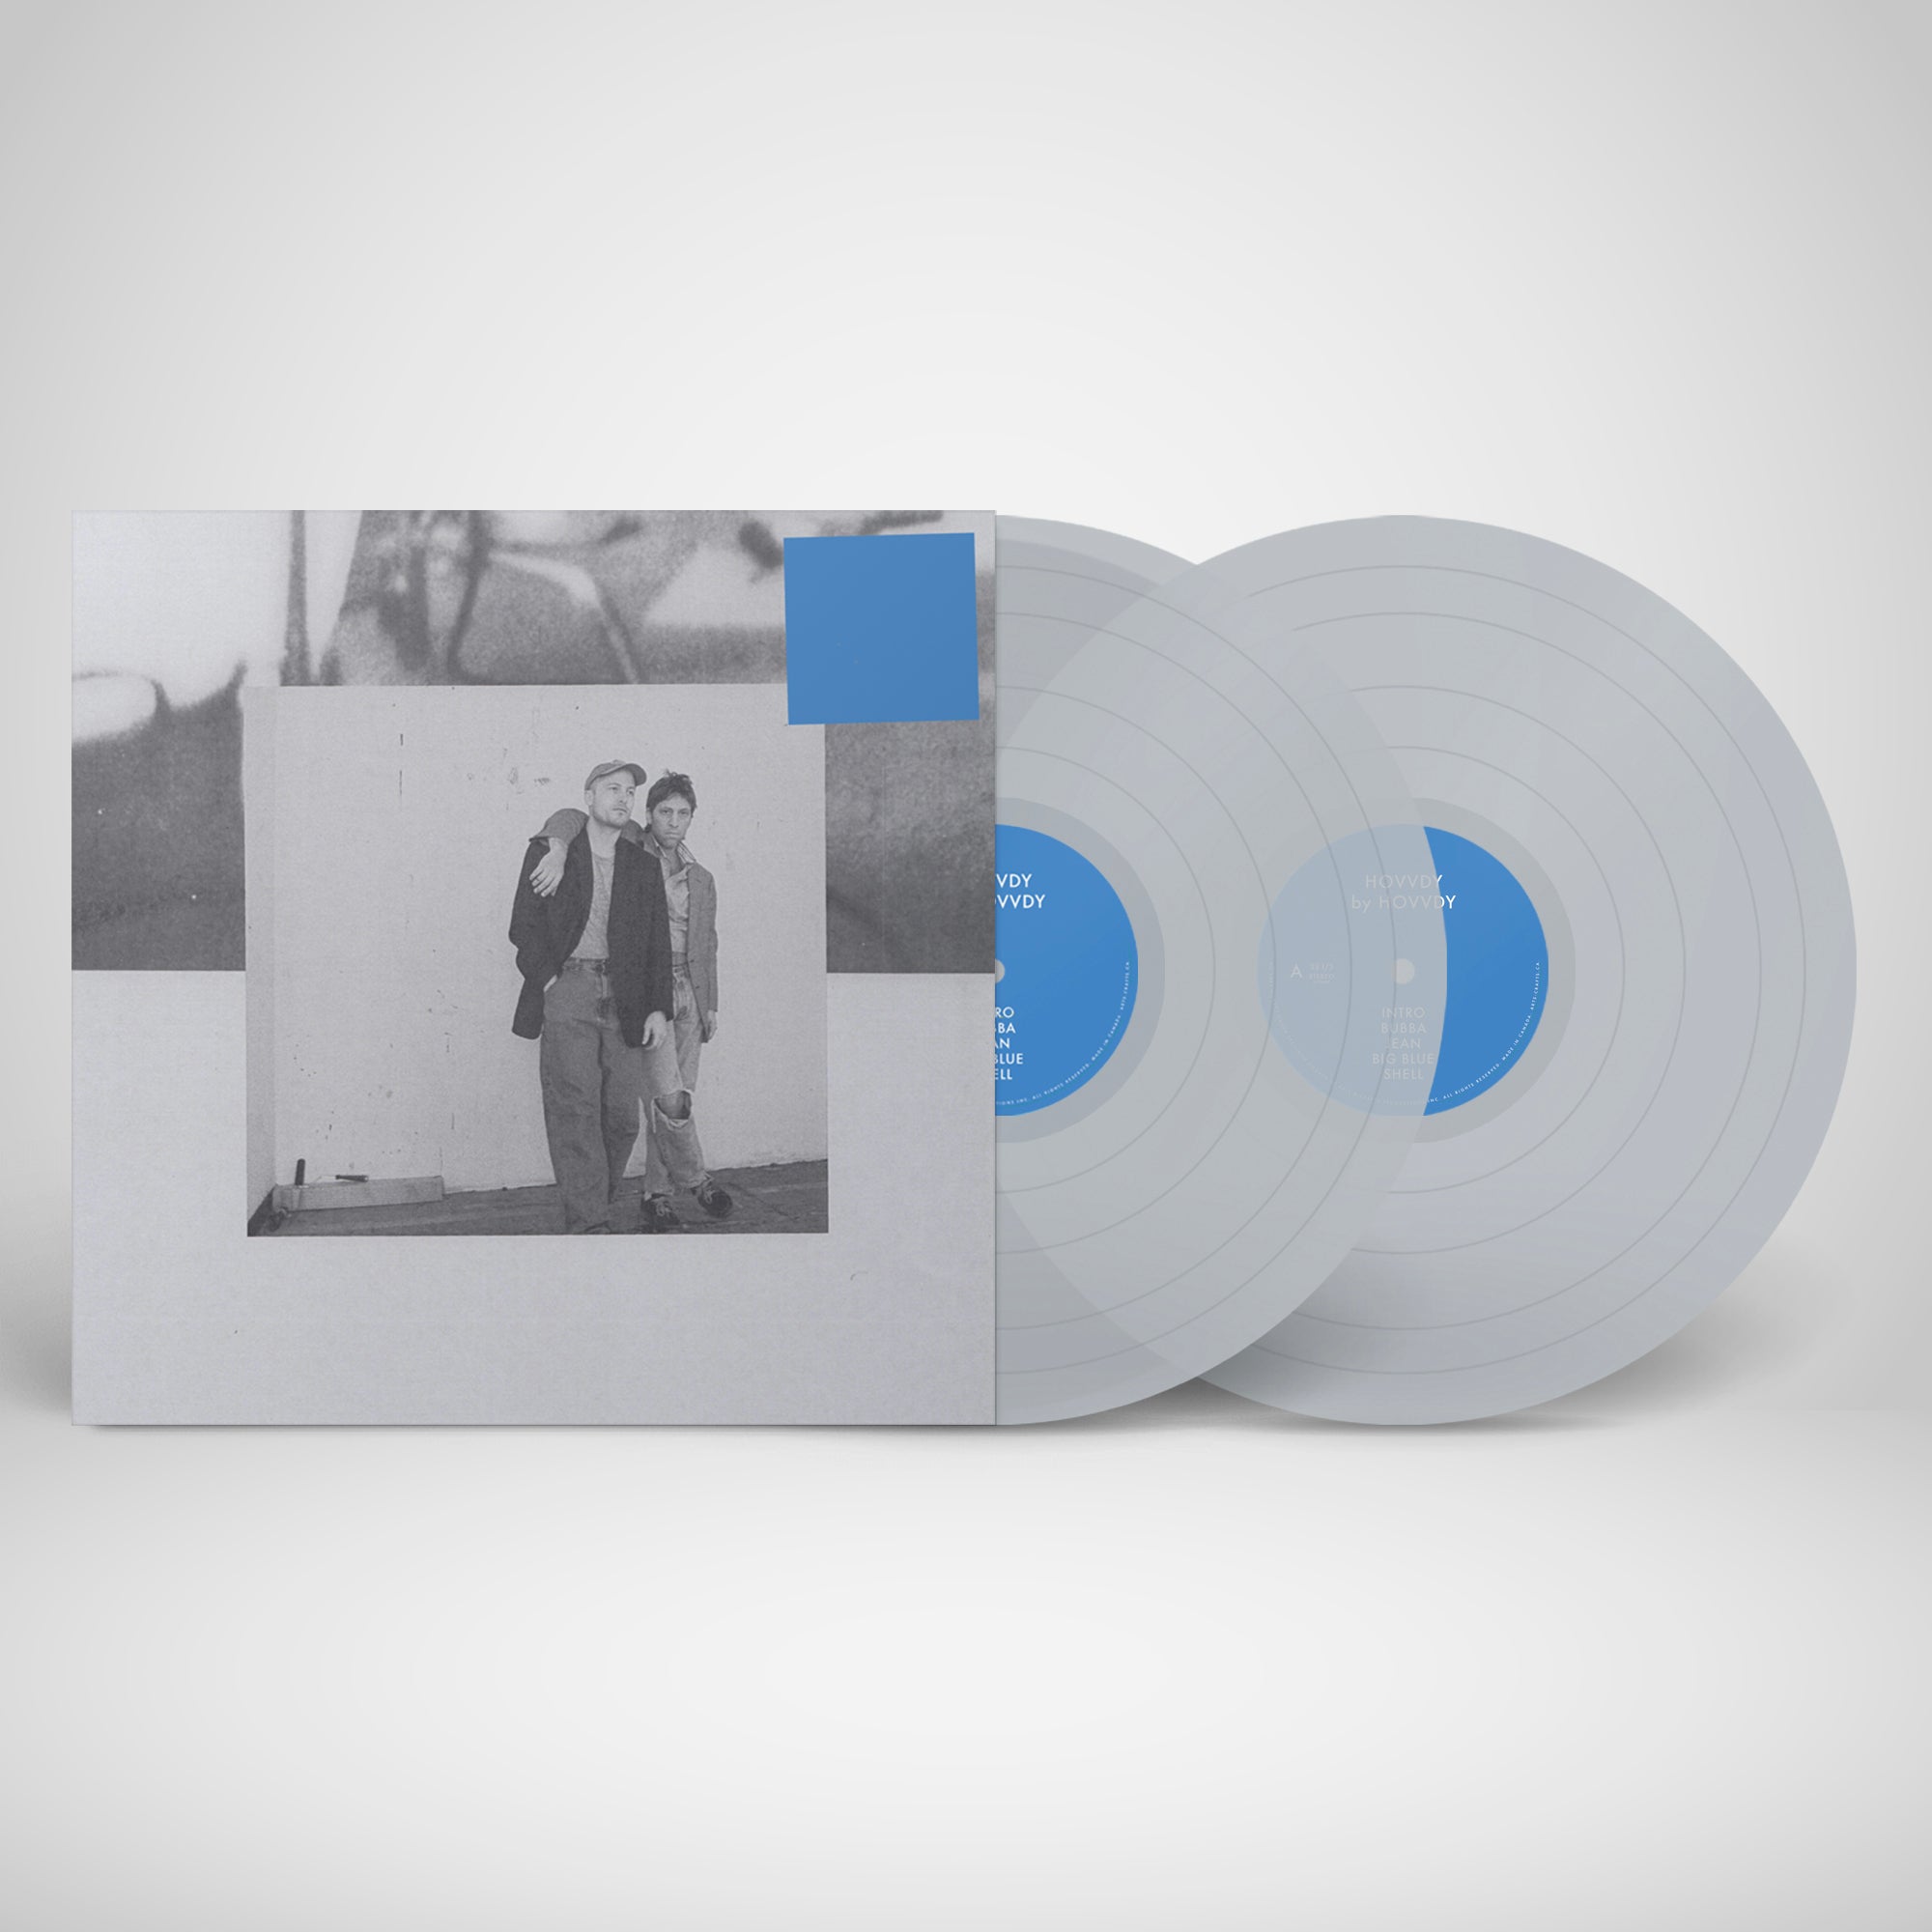 Hovvdy - Hovvdy: Limited Clear Vinyl 2LP